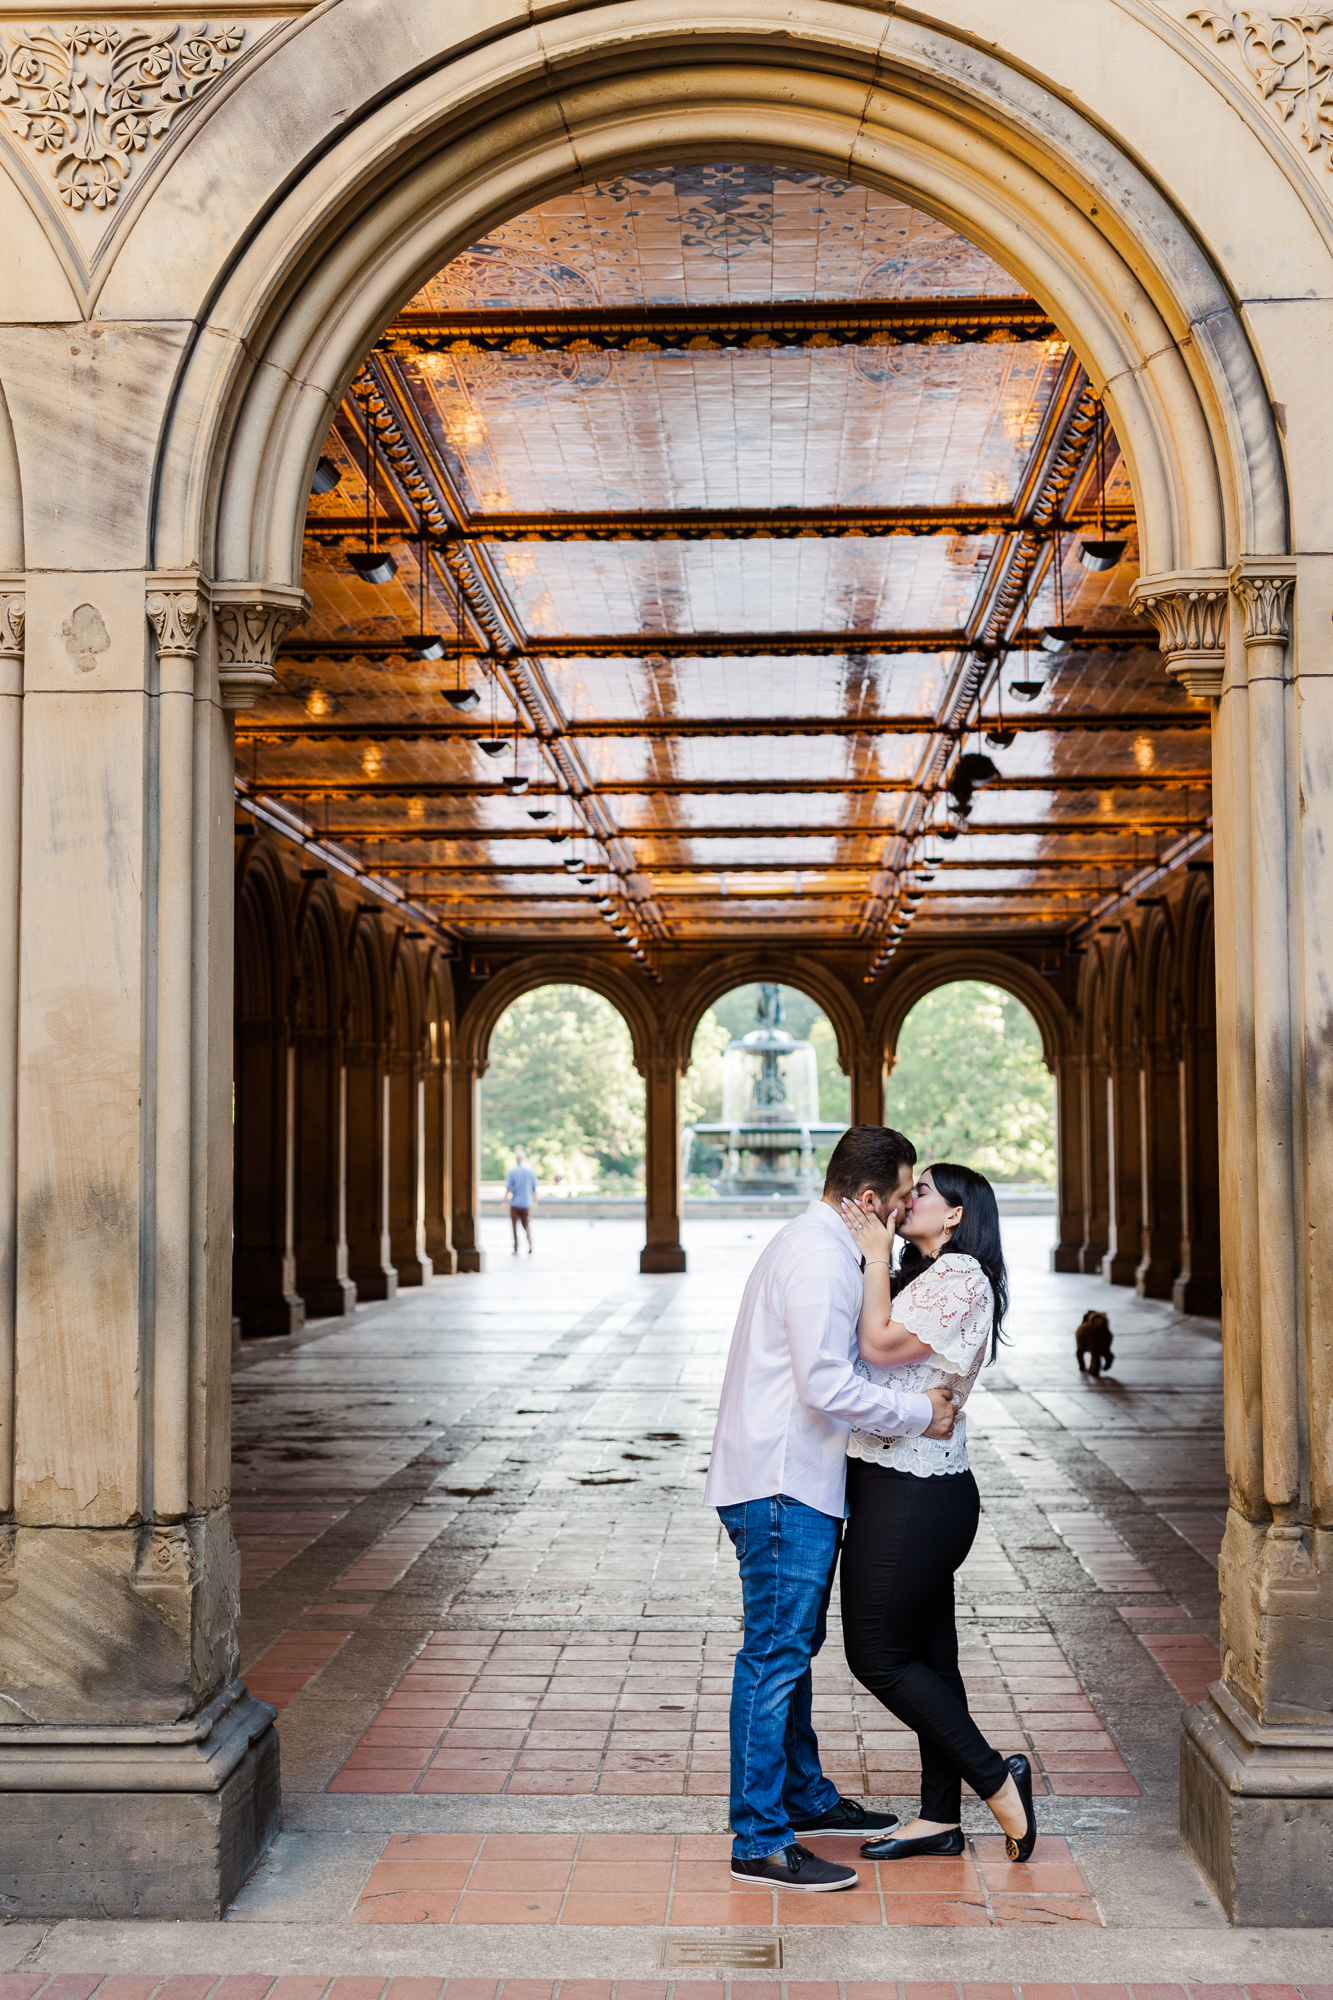 Radiant Central Park Engagement Photos in New York